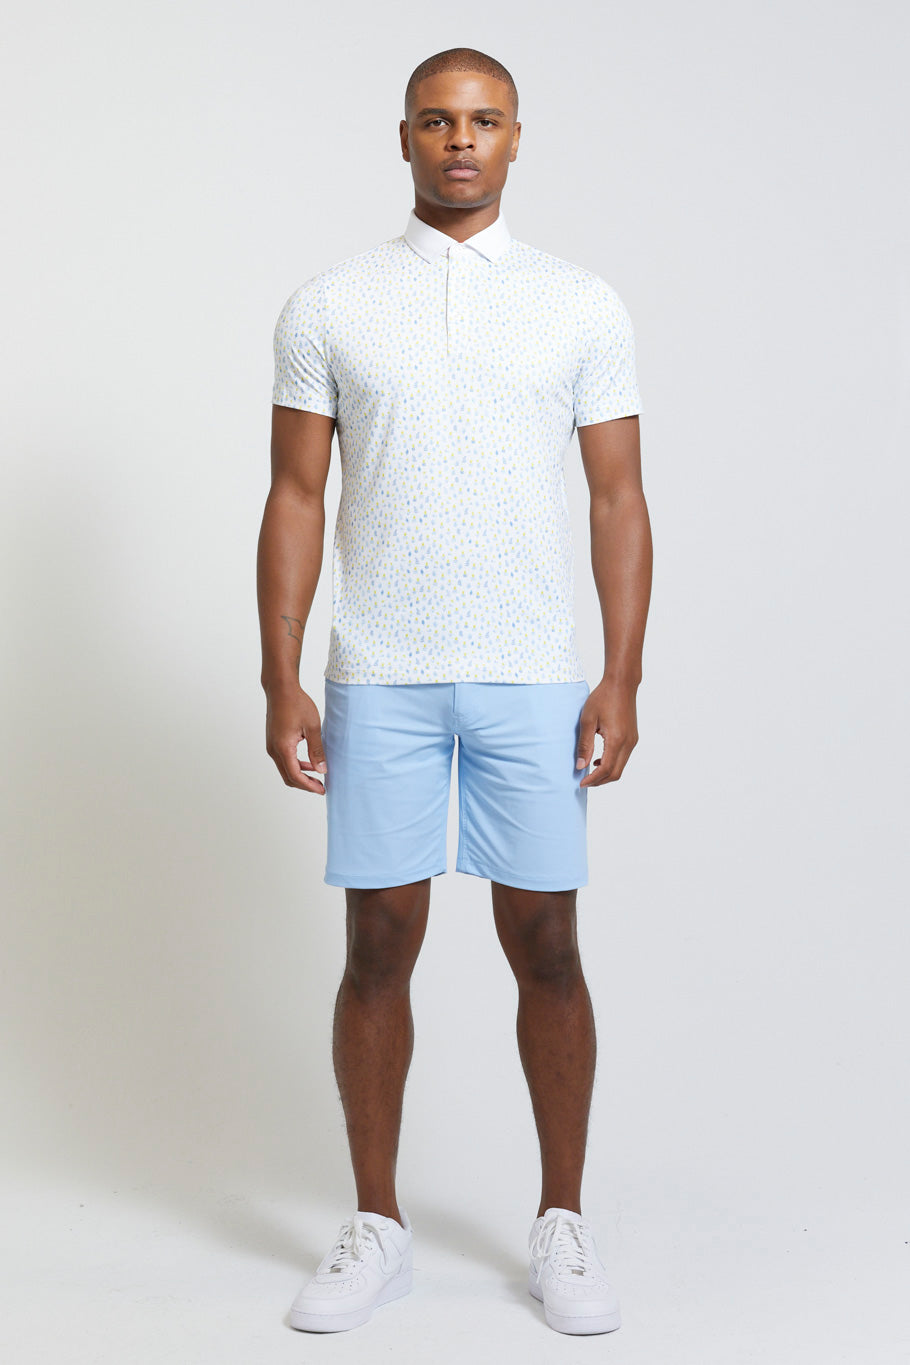 Image of the ashland polo in bright white ss23